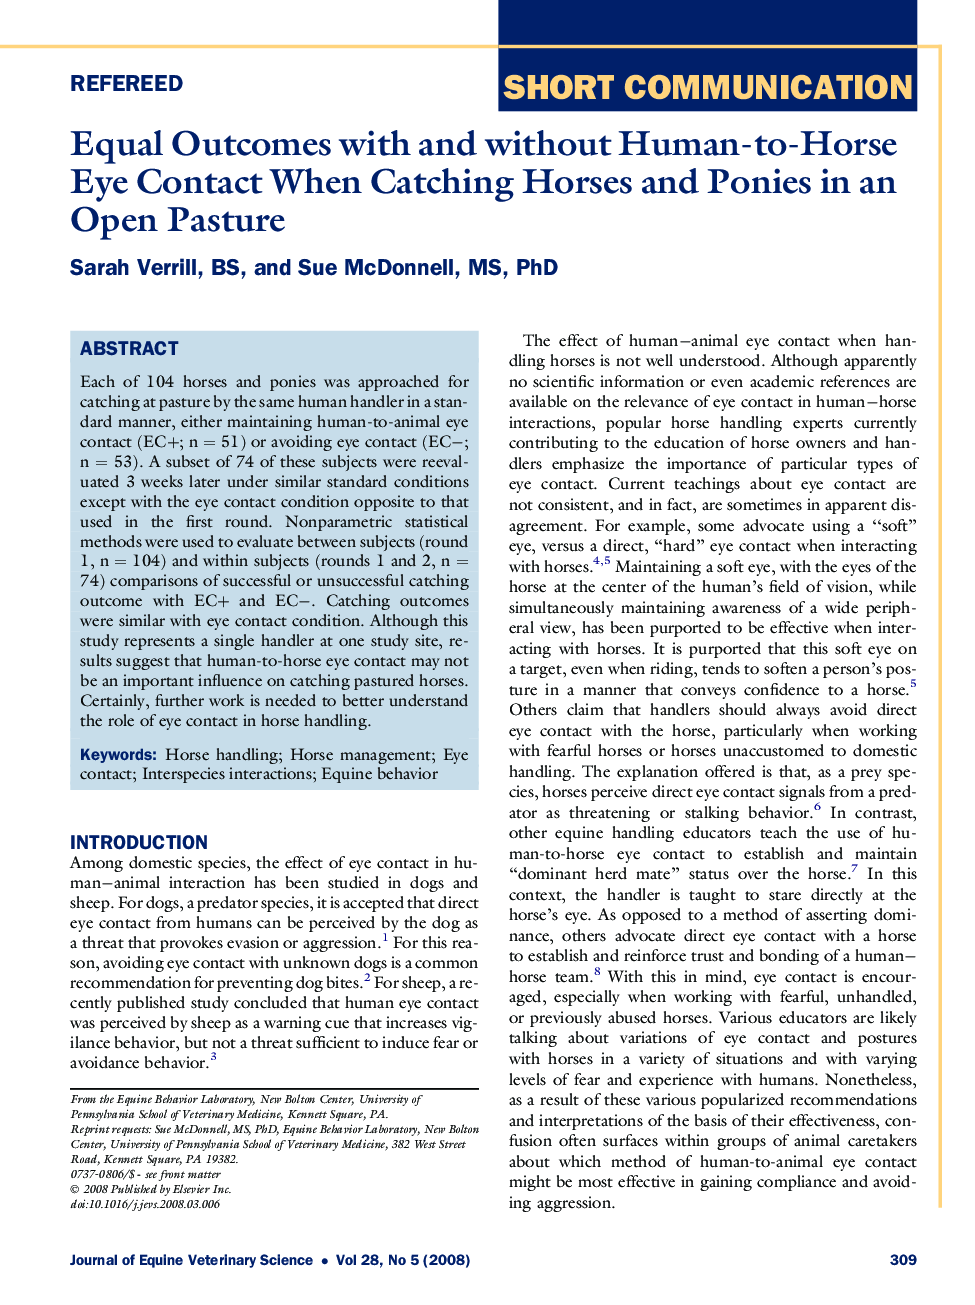 Equal Outcomes with and without Human-to-Horse Eye Contact When Catching Horses and Ponies in an Open Pasture 